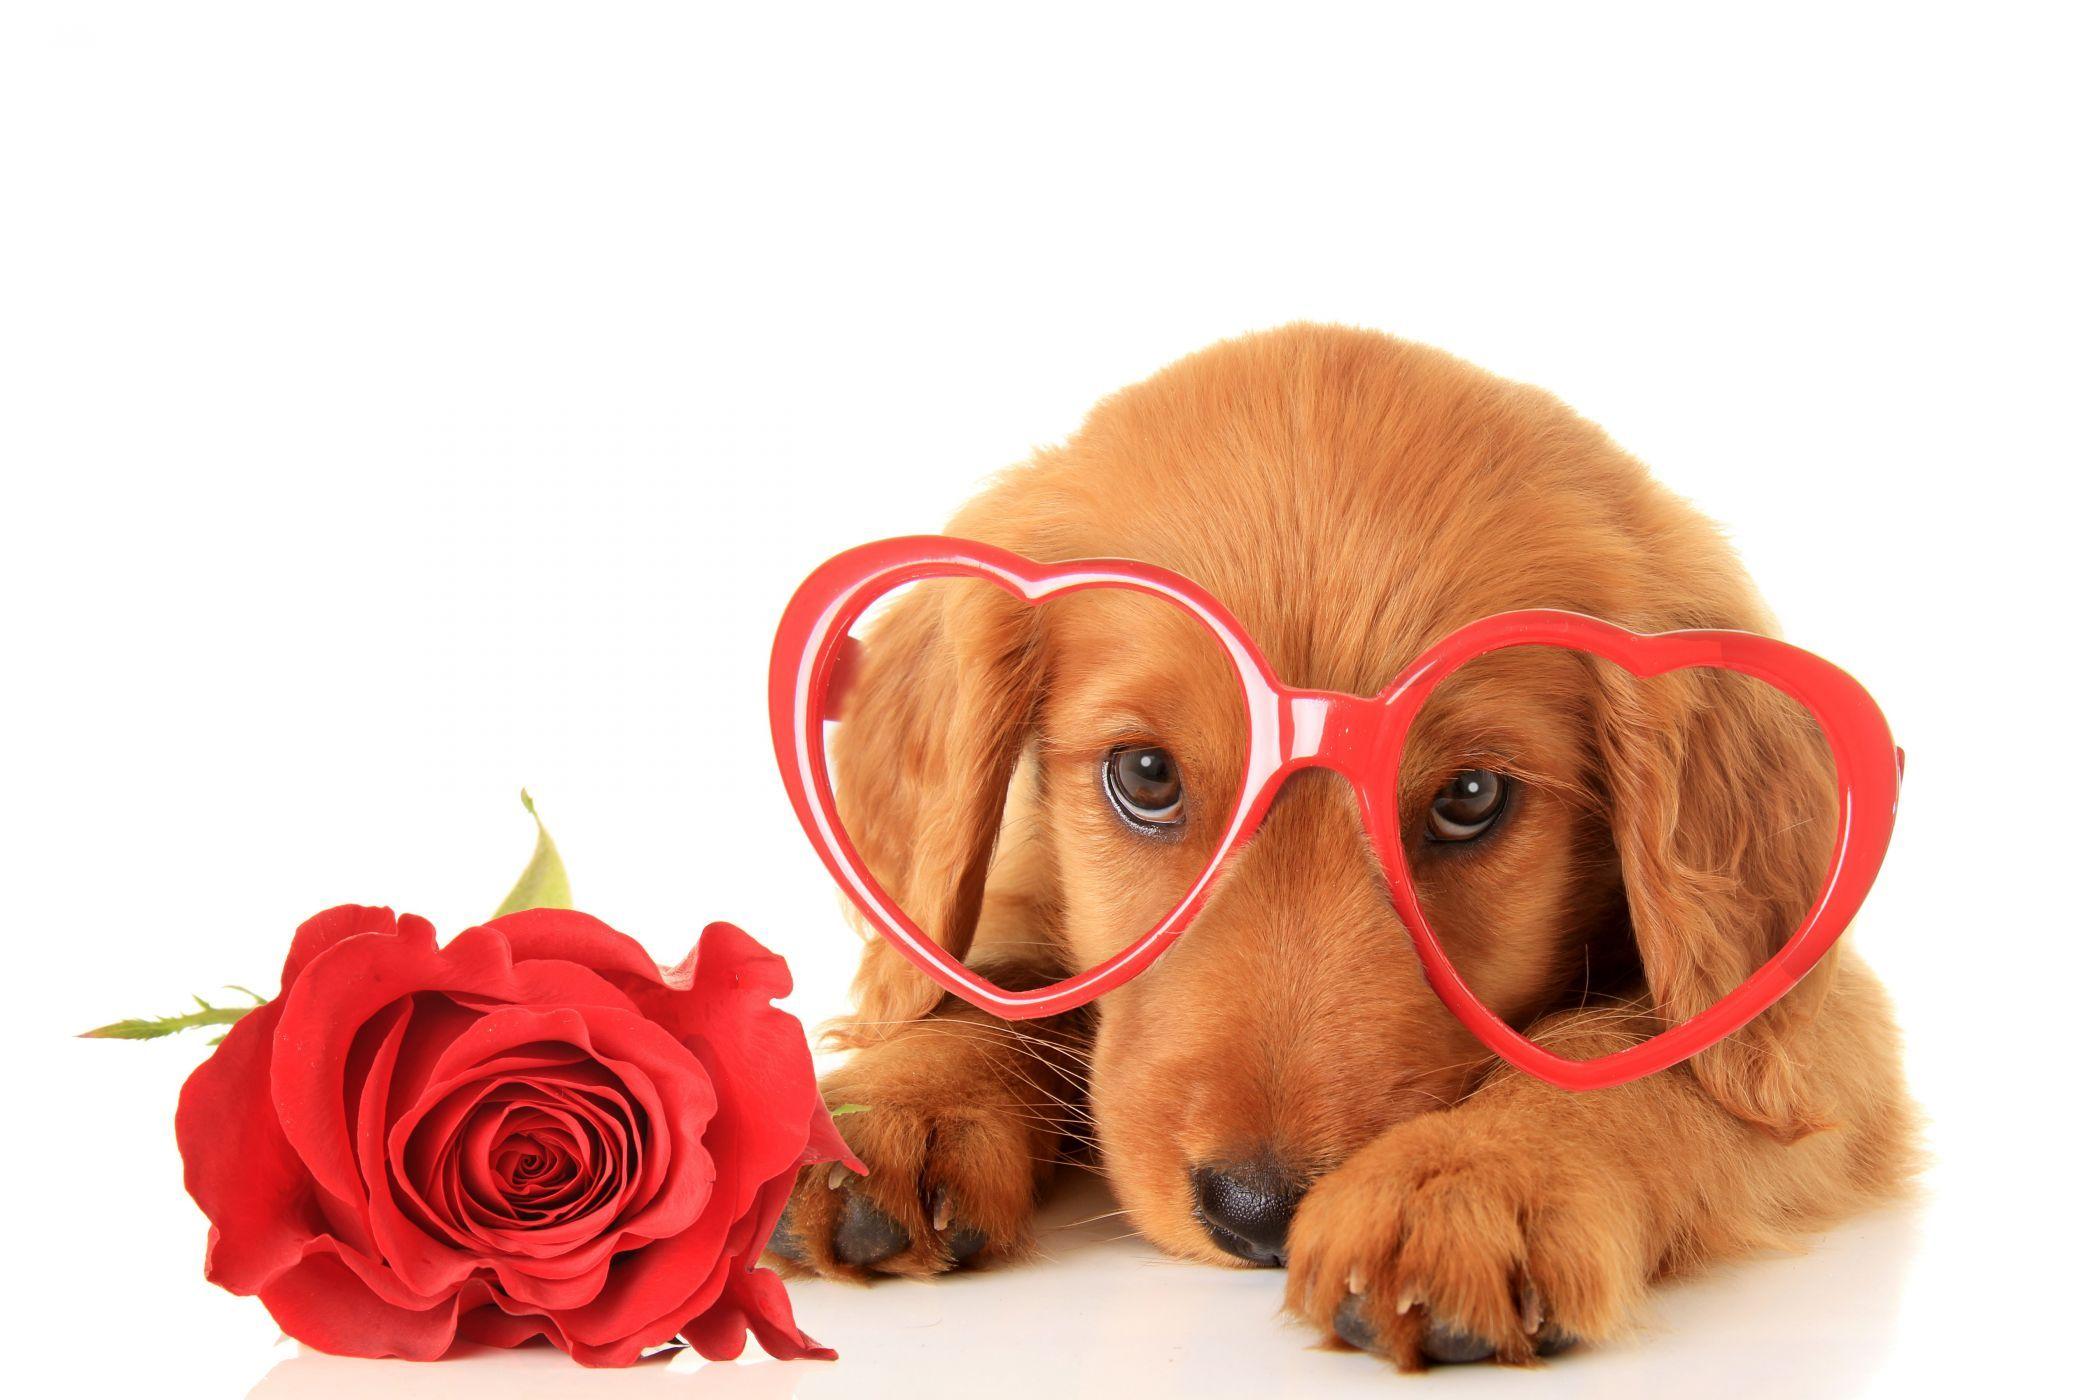 Valentine's Day Dogs Roses Retriever Glasses Heart Glance Animals wallpaper. Valentines day dog, Dog valentines, Puppy valentines